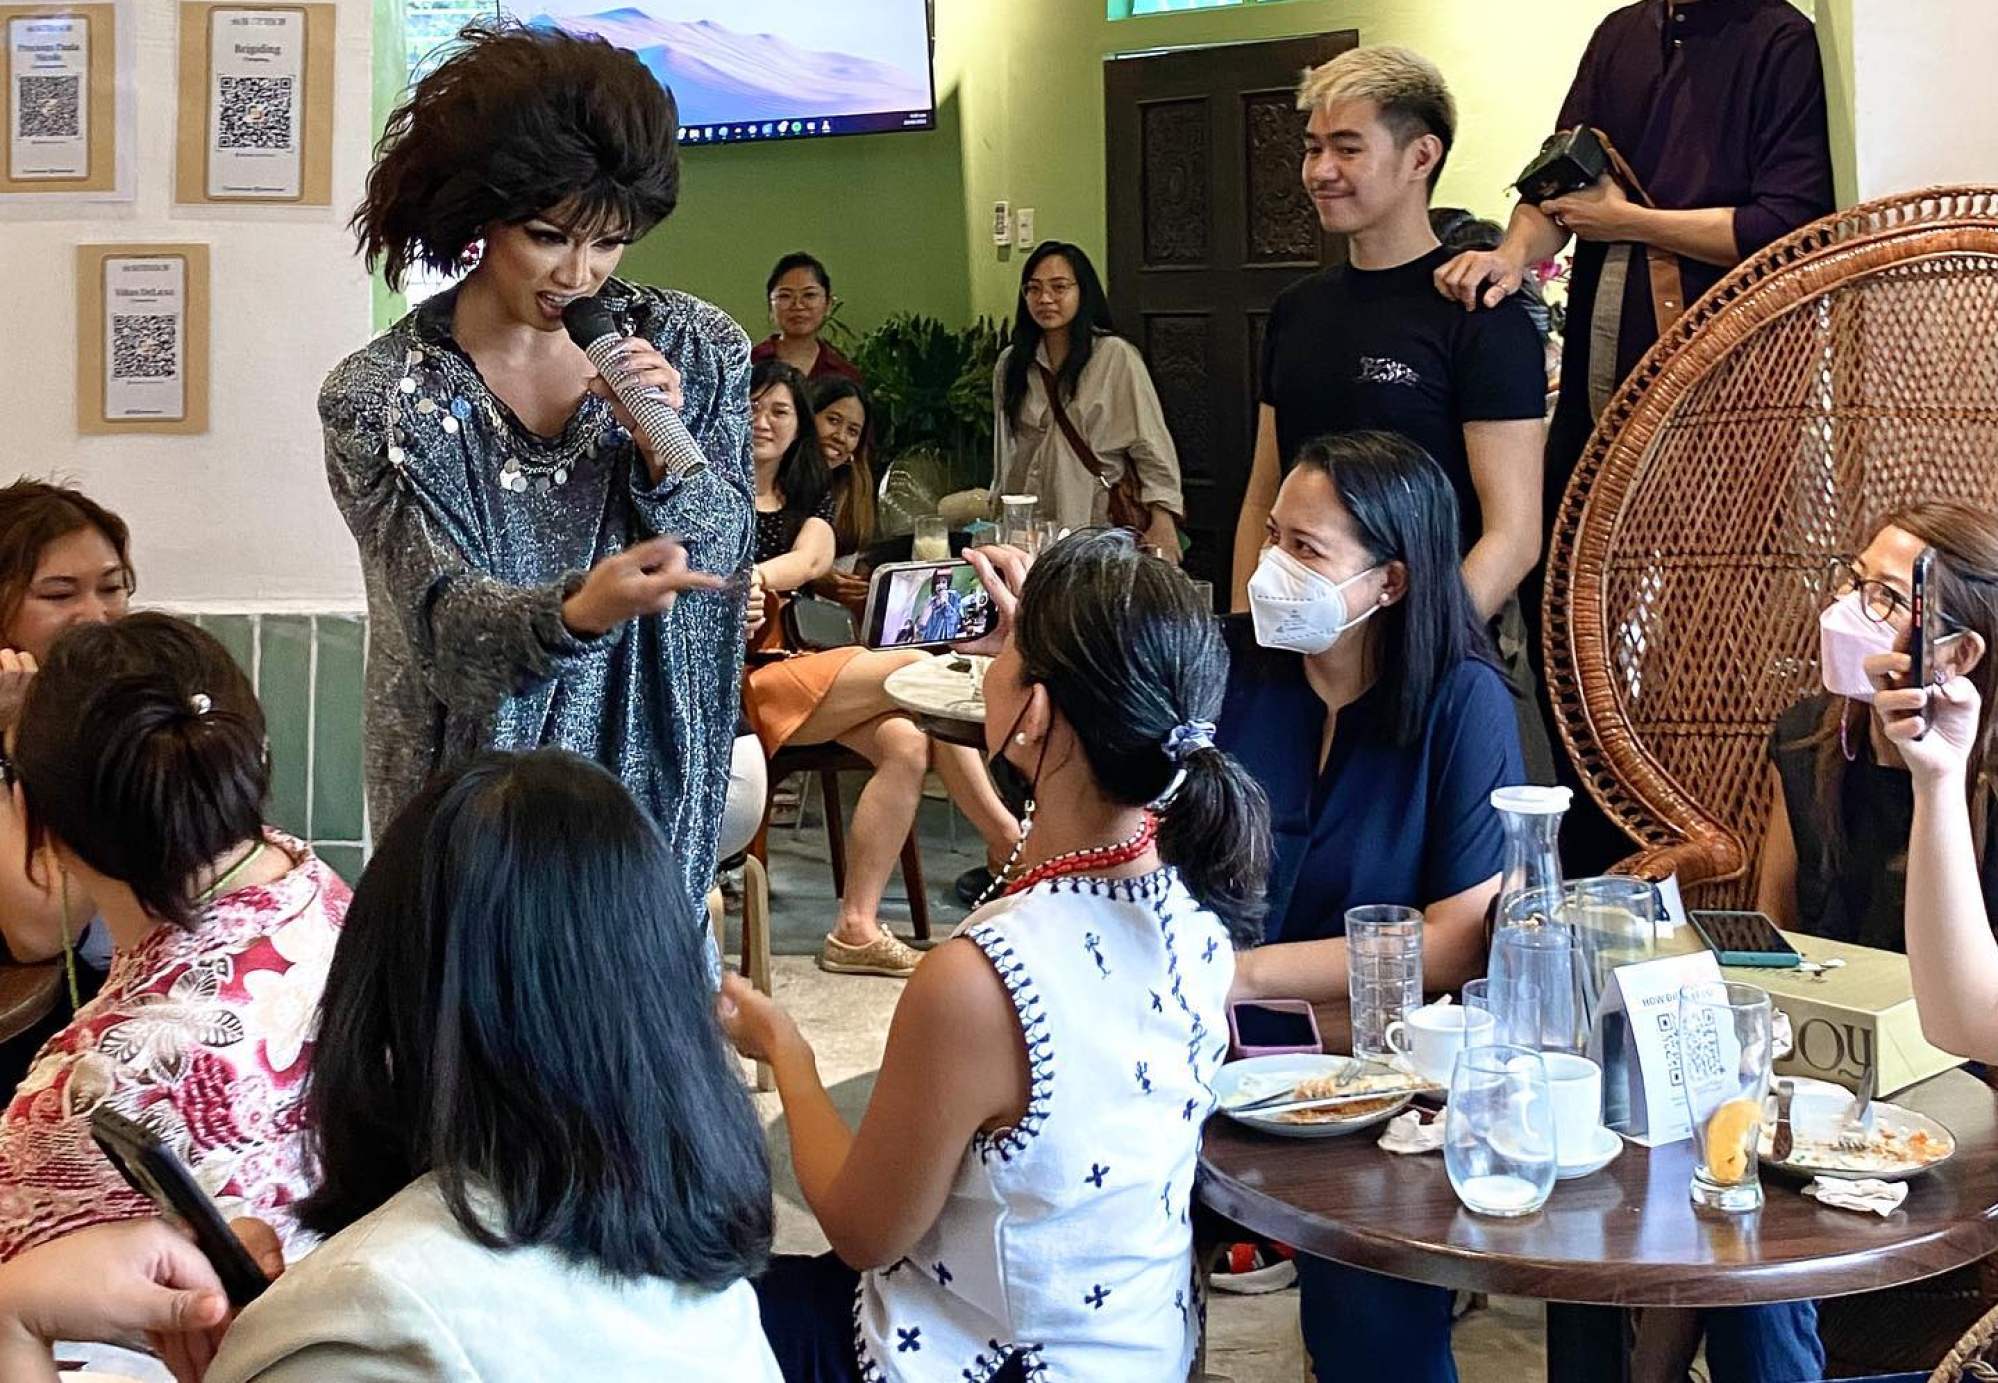 Philippine drag culture is on the rise, but will it usher in LGBTQ